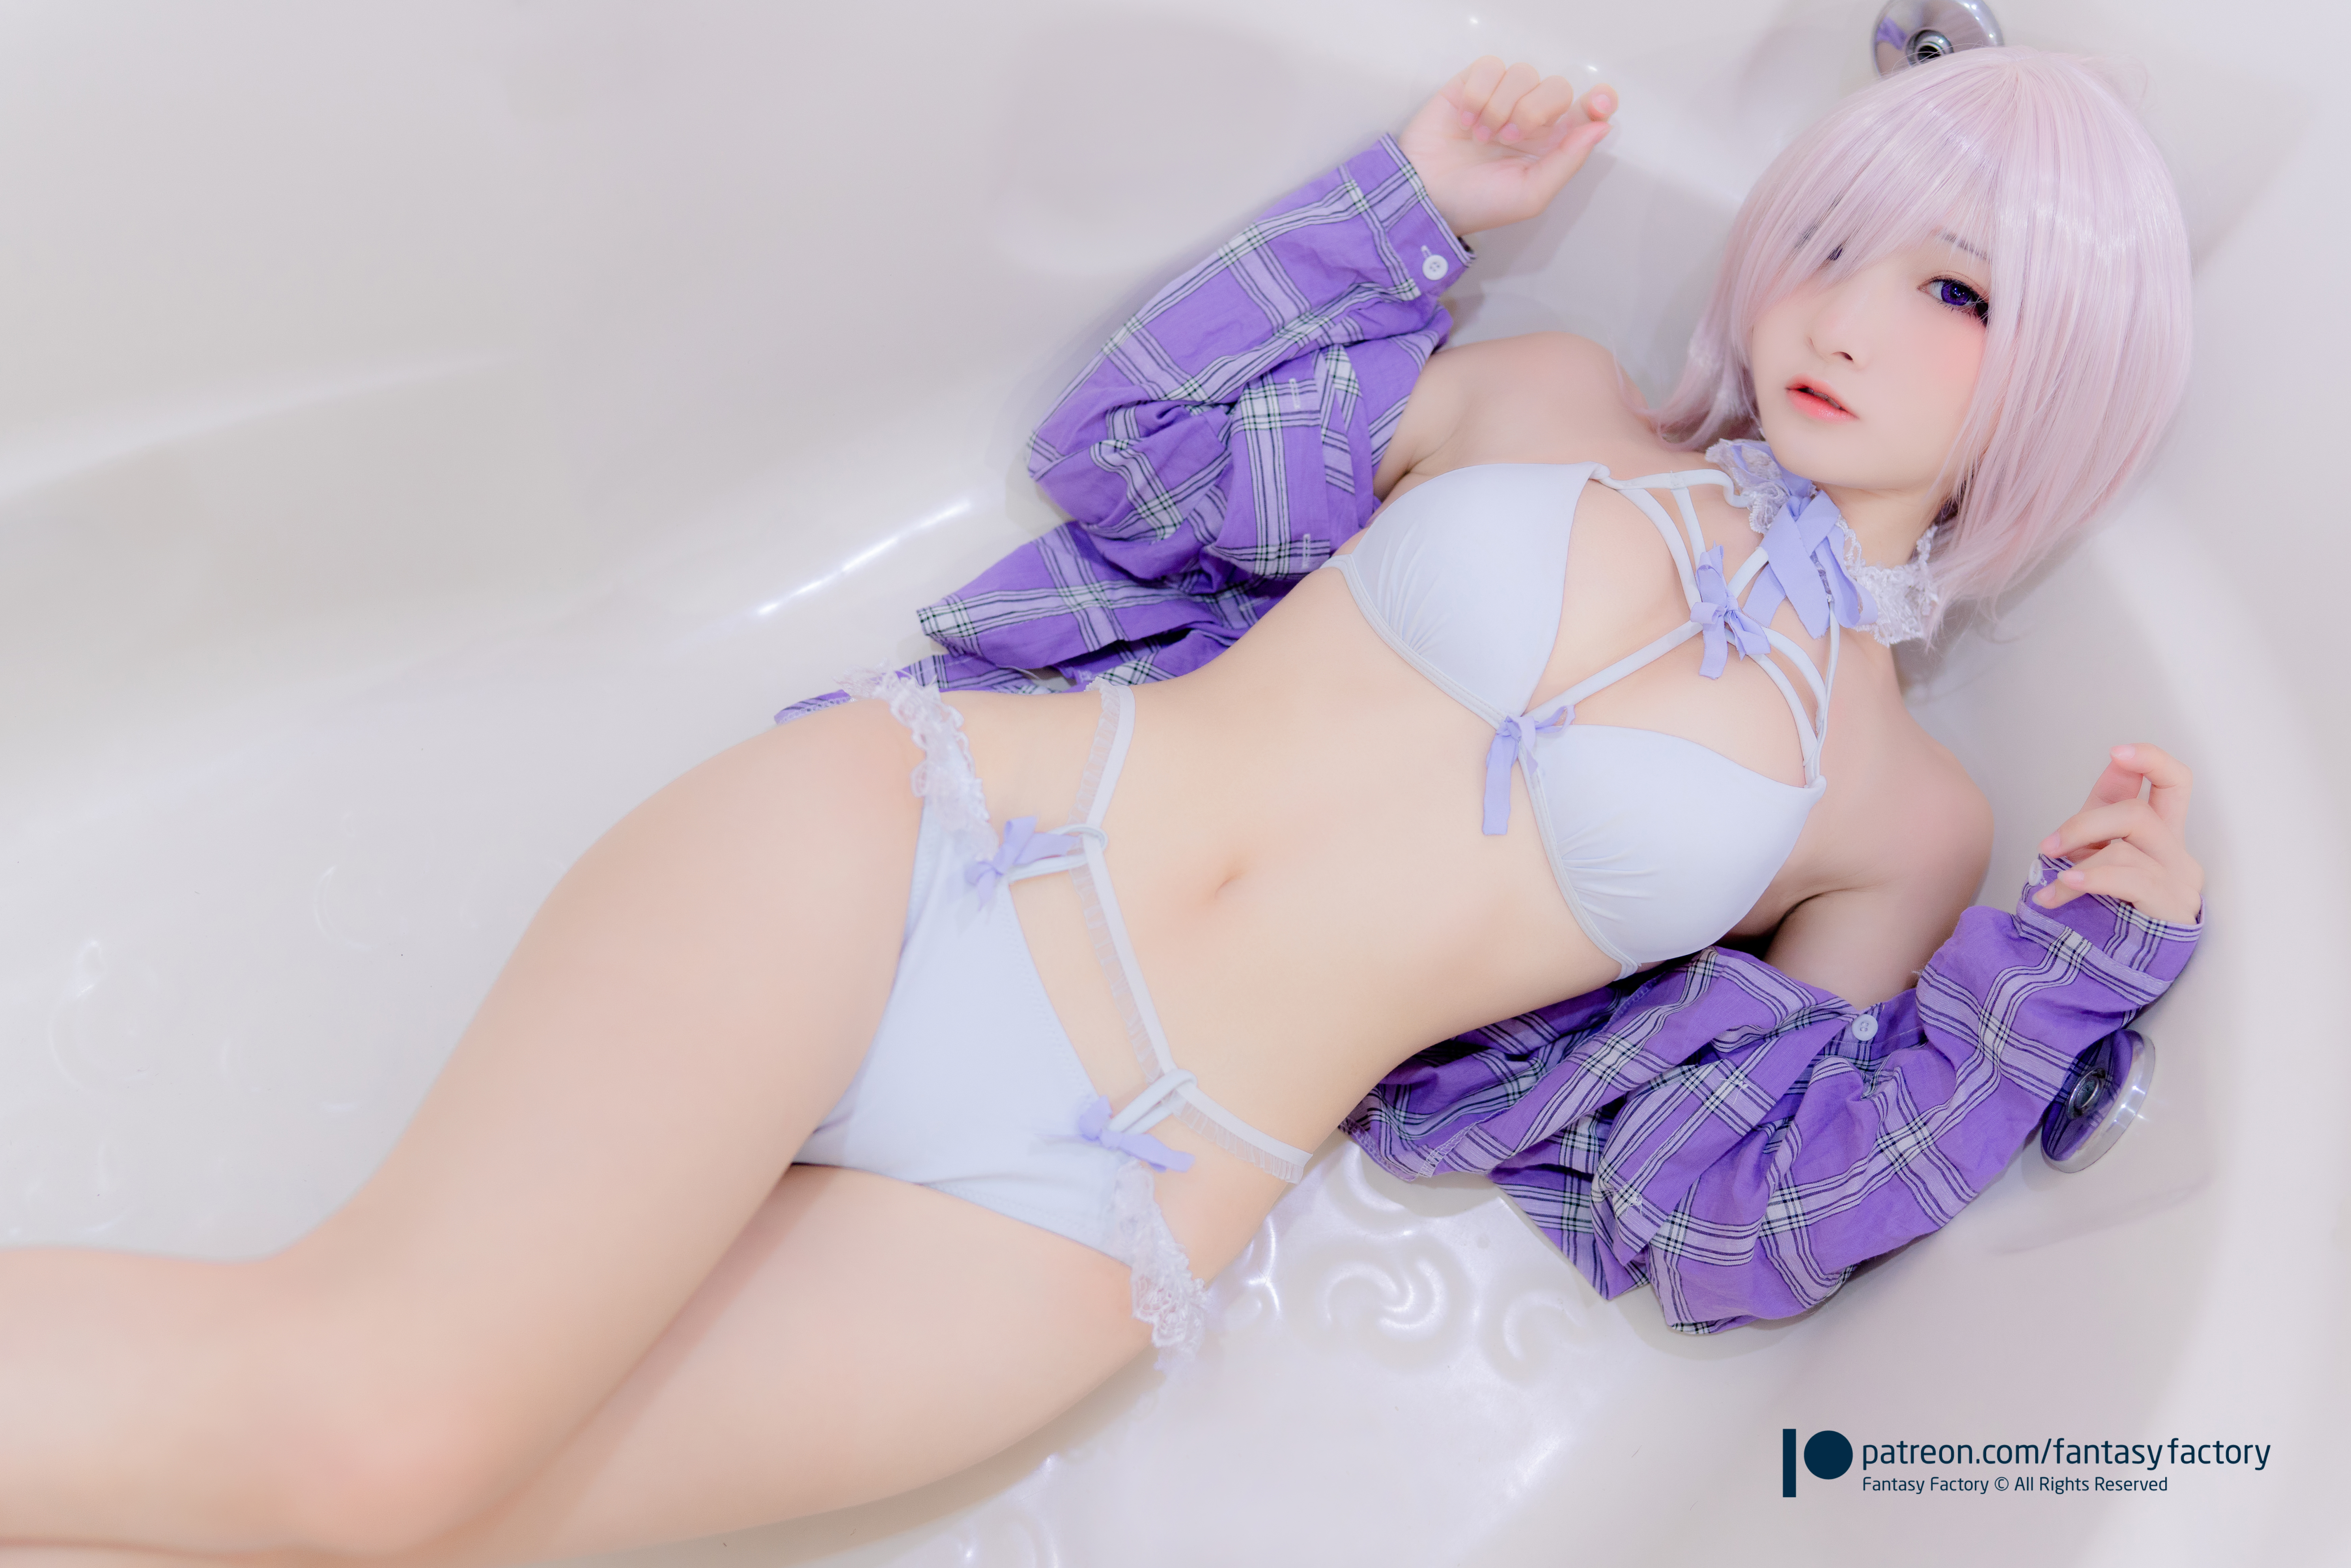 People 5961x3976 women model Asian cosplay Mash Kyrielight Fate/Grand Order Fate series shirt underwear bra belly lying on back bathtub looking at viewer indoors women indoors Fantasy Factory